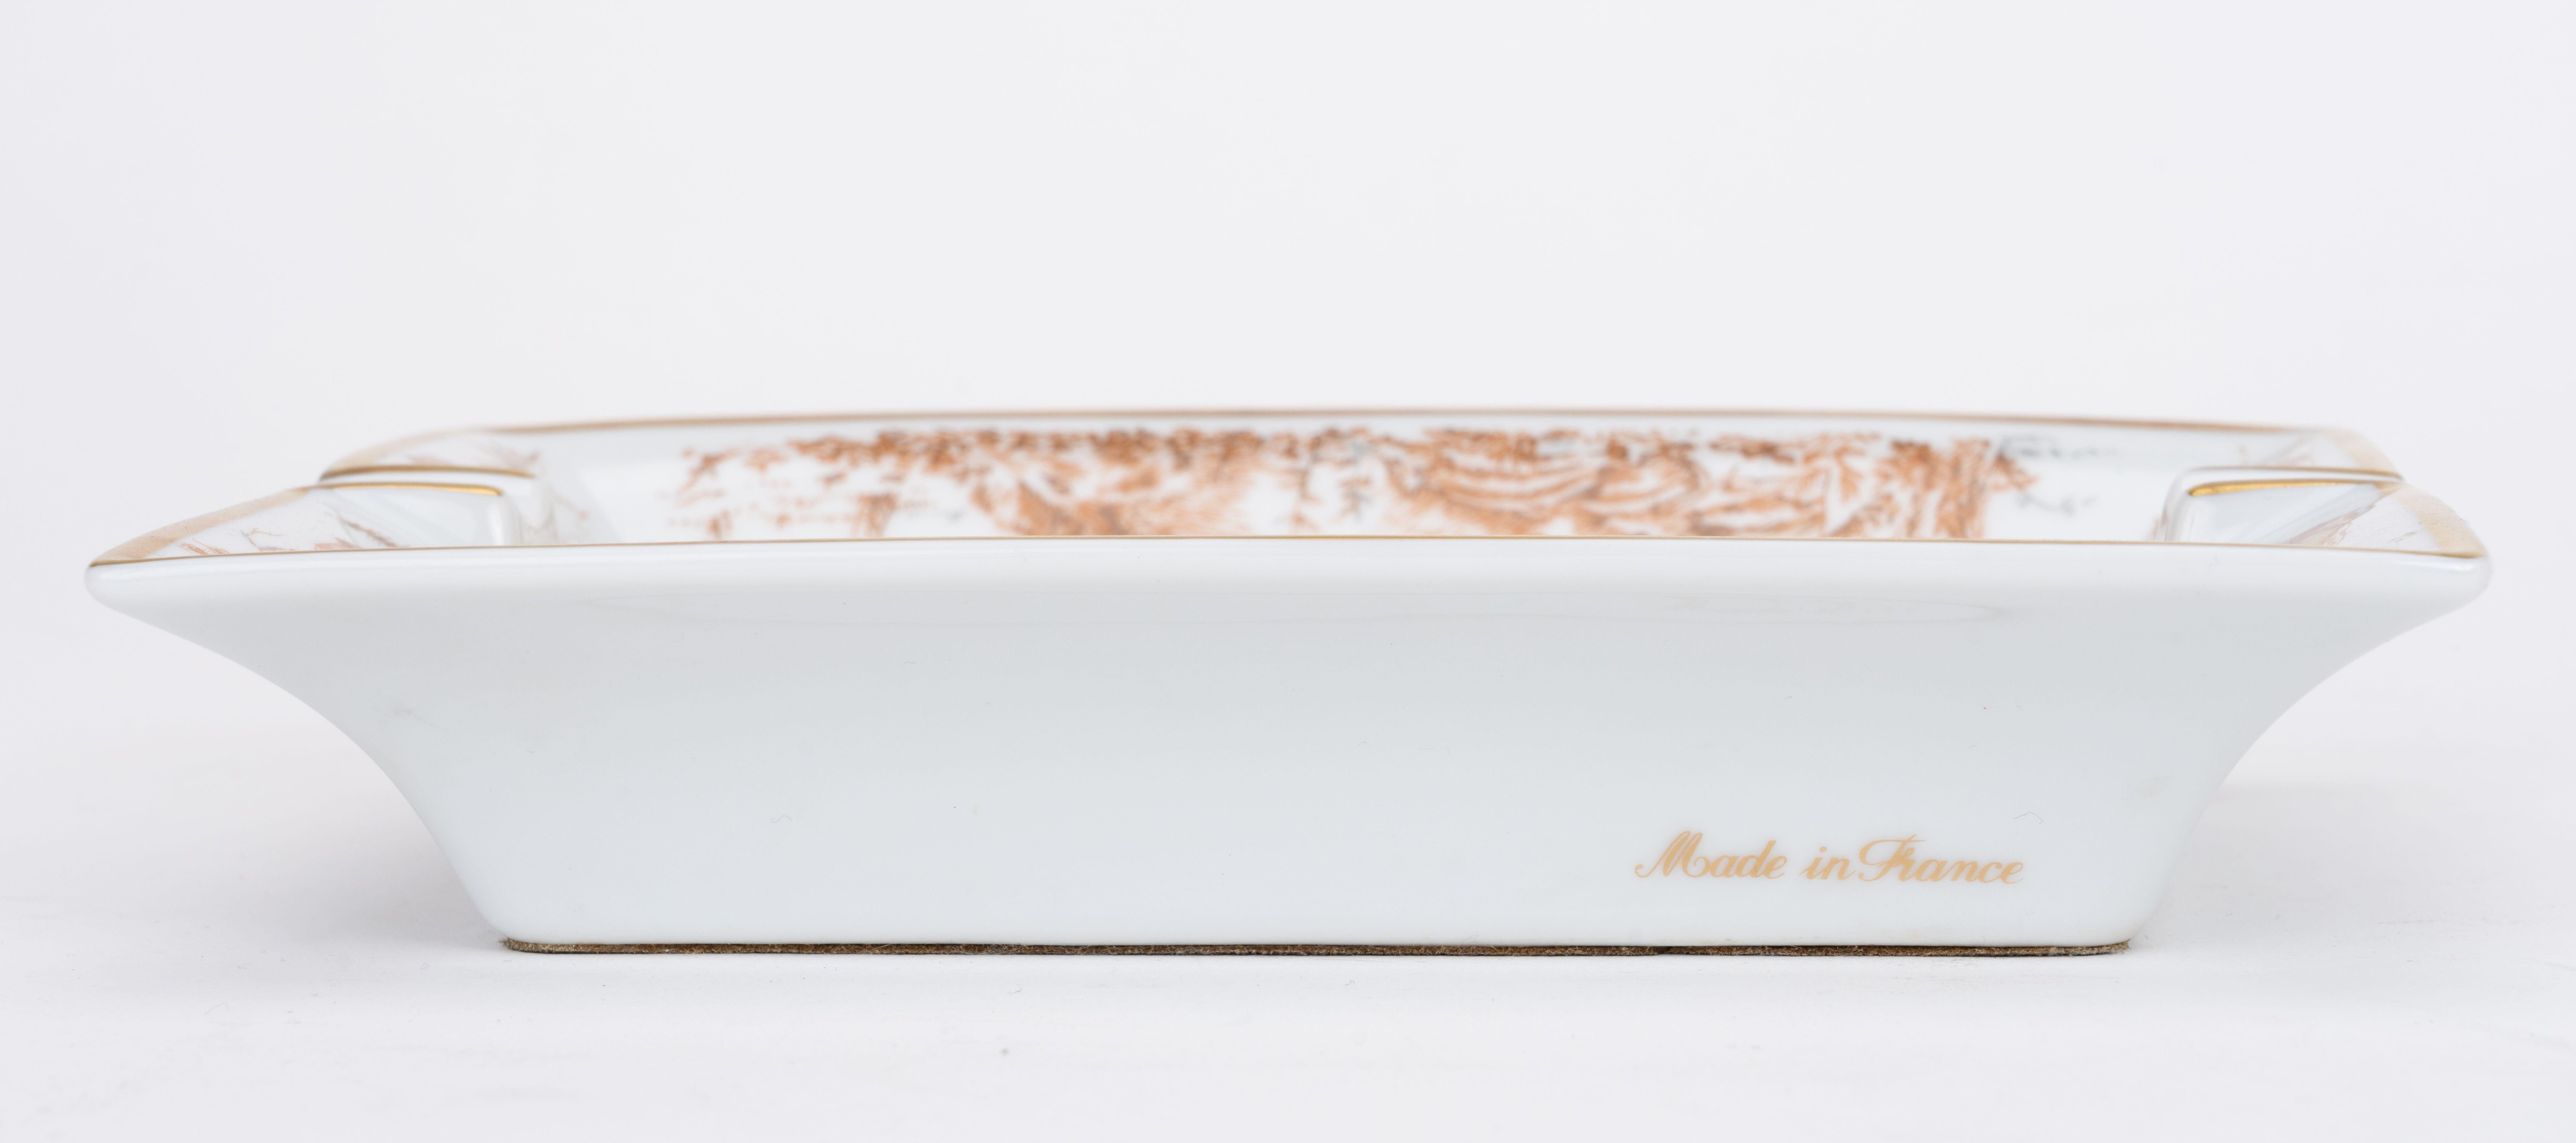 Hermès Porcelain Wild Boar Ashtray In Excellent Condition For Sale In West Hollywood, CA